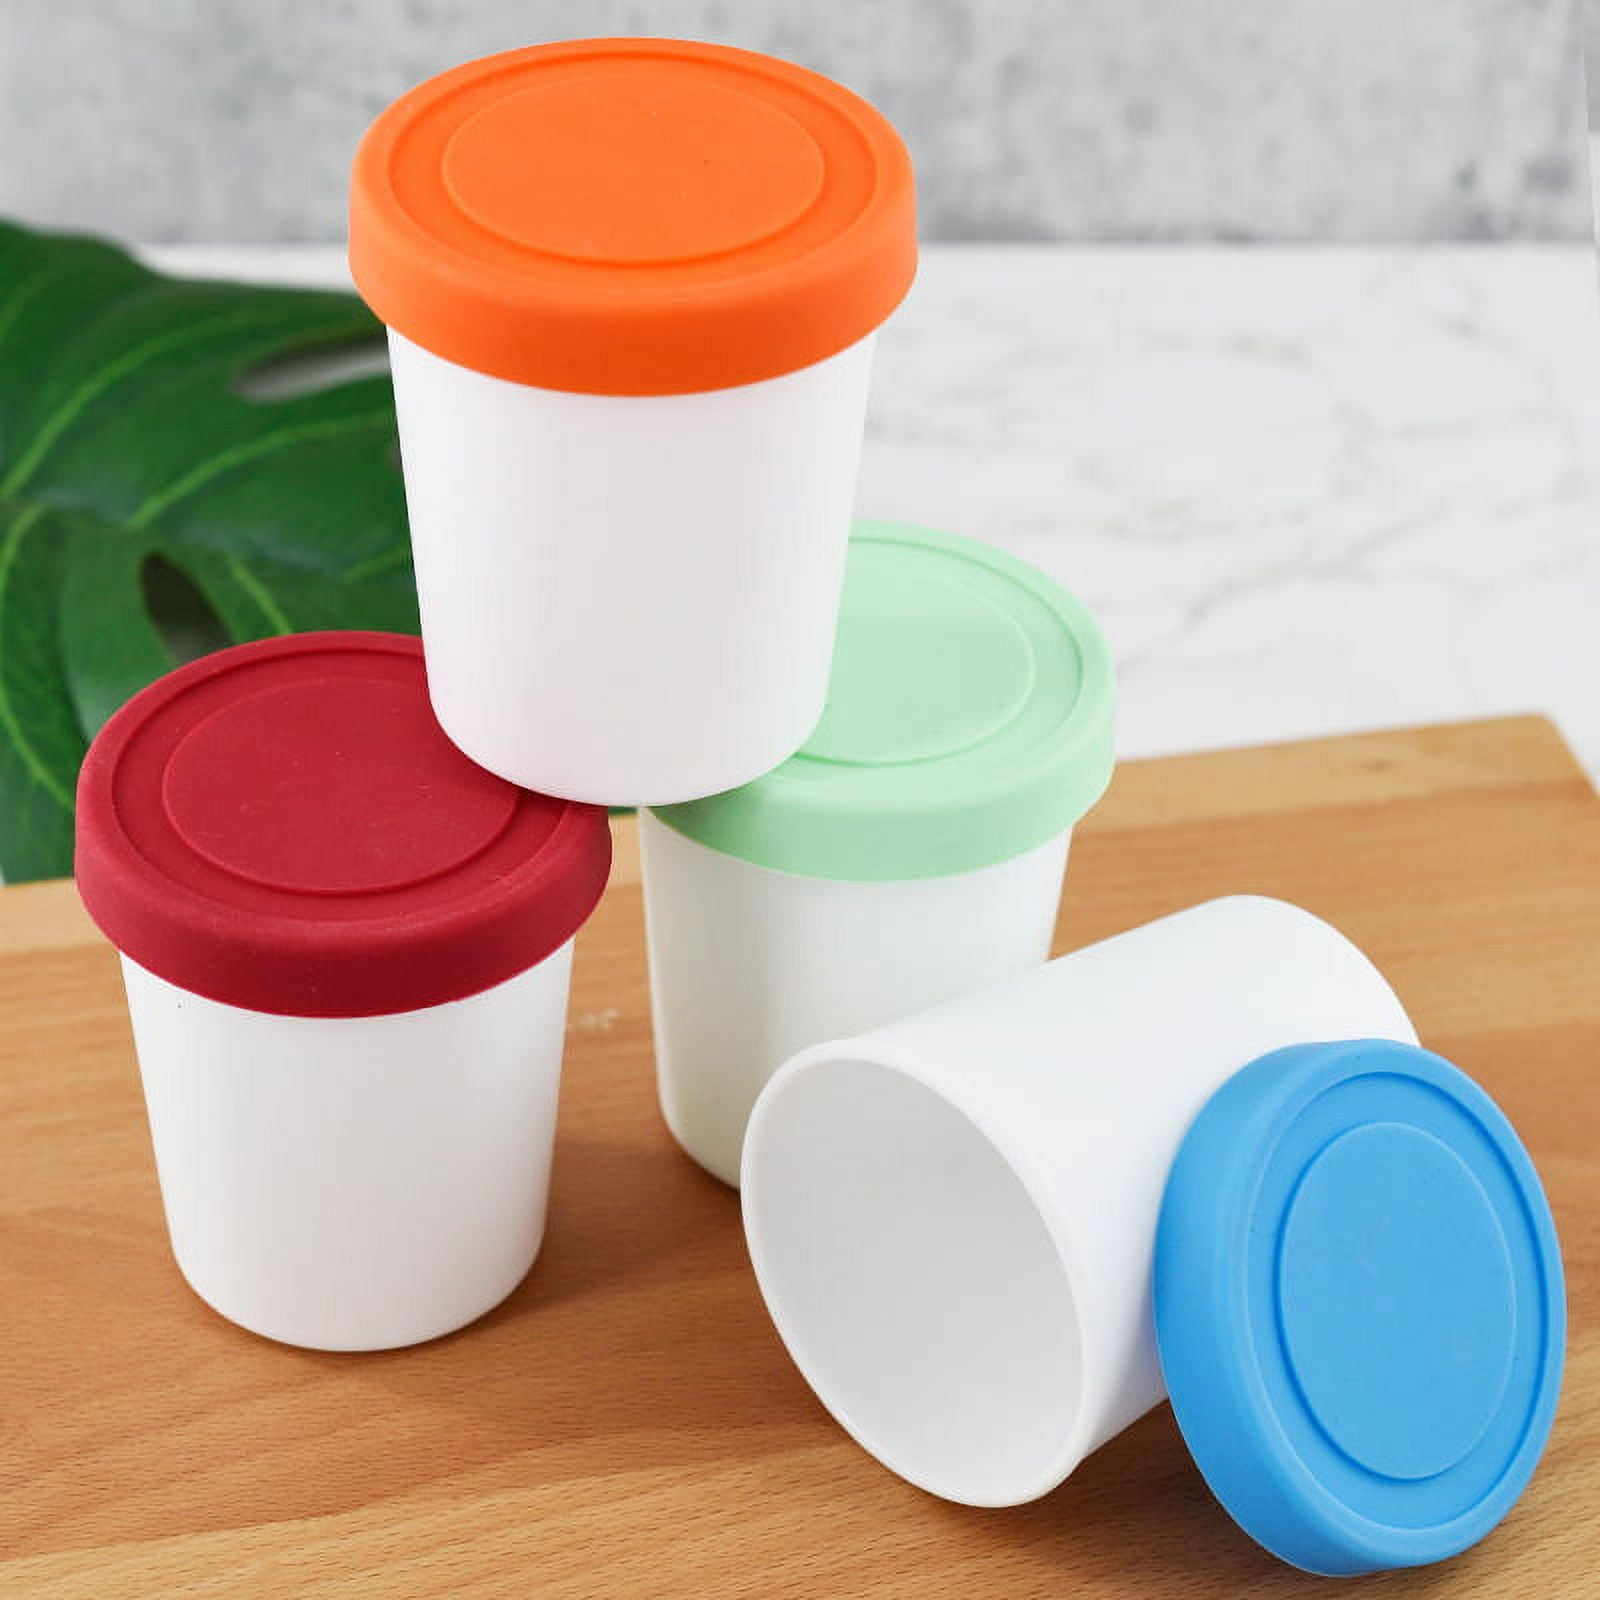 SUMO Ice Cream Containers for Homemade Ice Cream (2 Containers - 1.5 Quart  Each) Reusable Freezer Storage (Red) for Sale in Bothell, WA - OfferUp